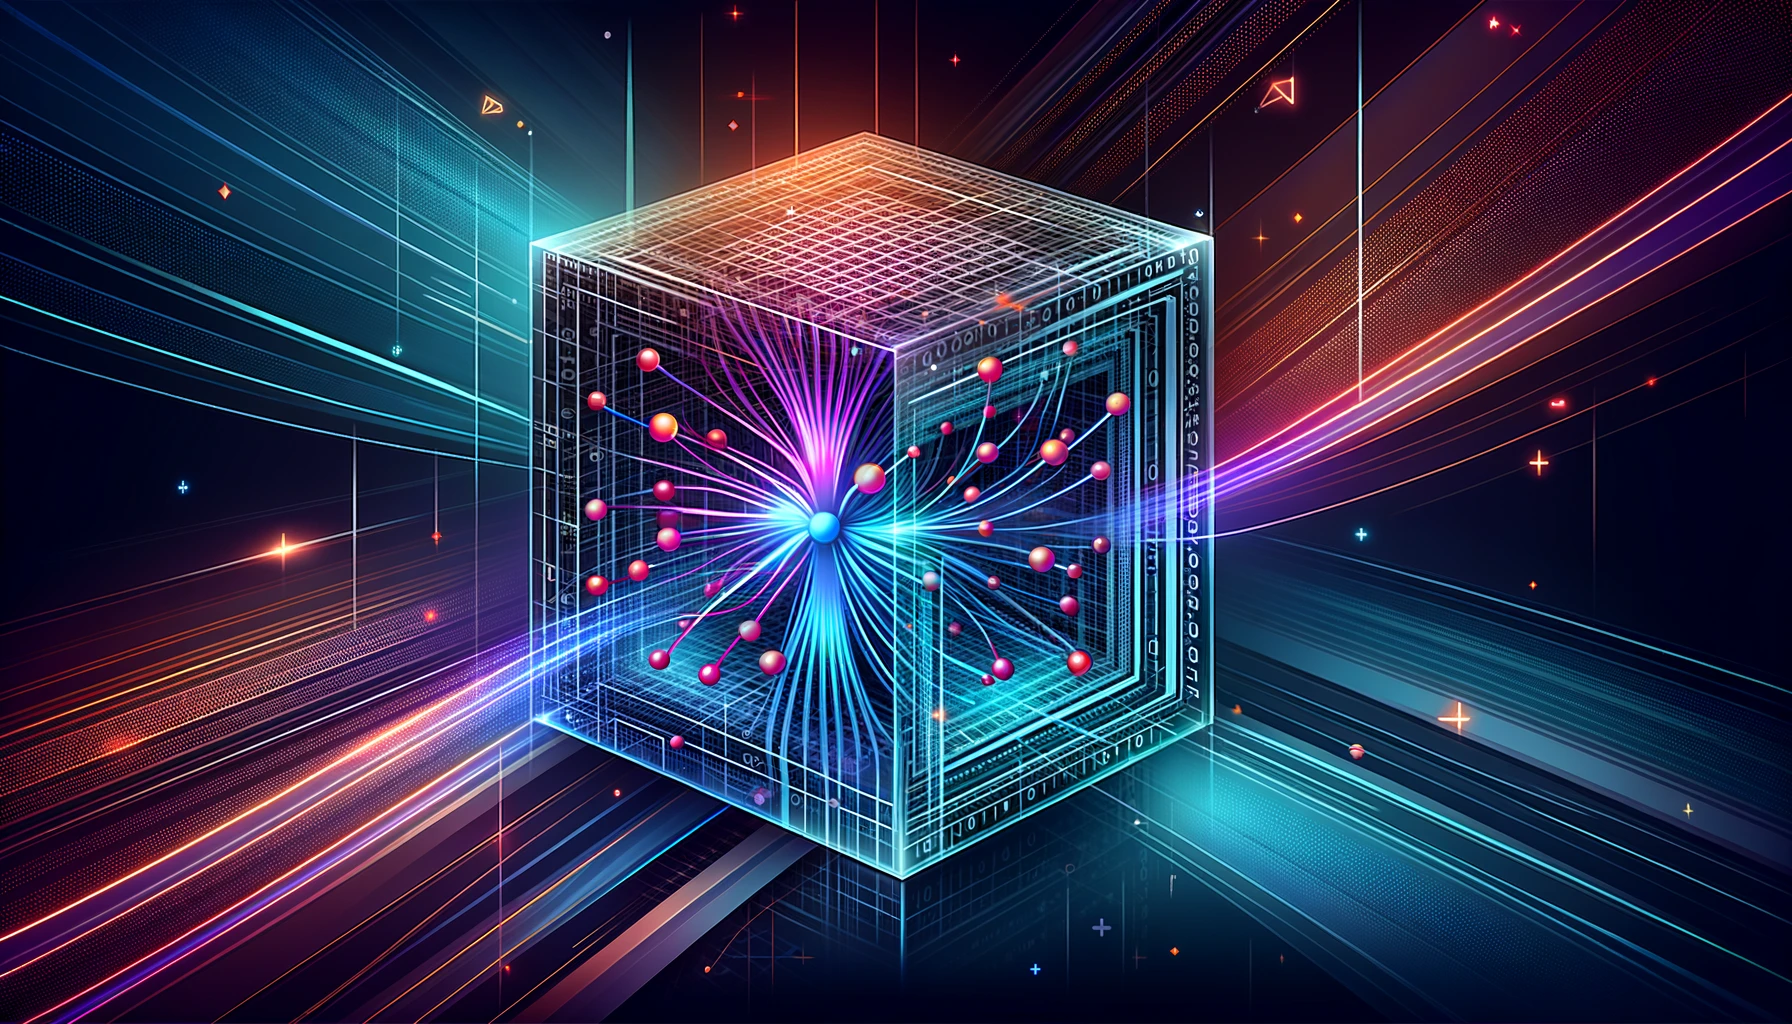 Multiverse secures $27 million in funding for quantum computing software aimed at large language model giants.